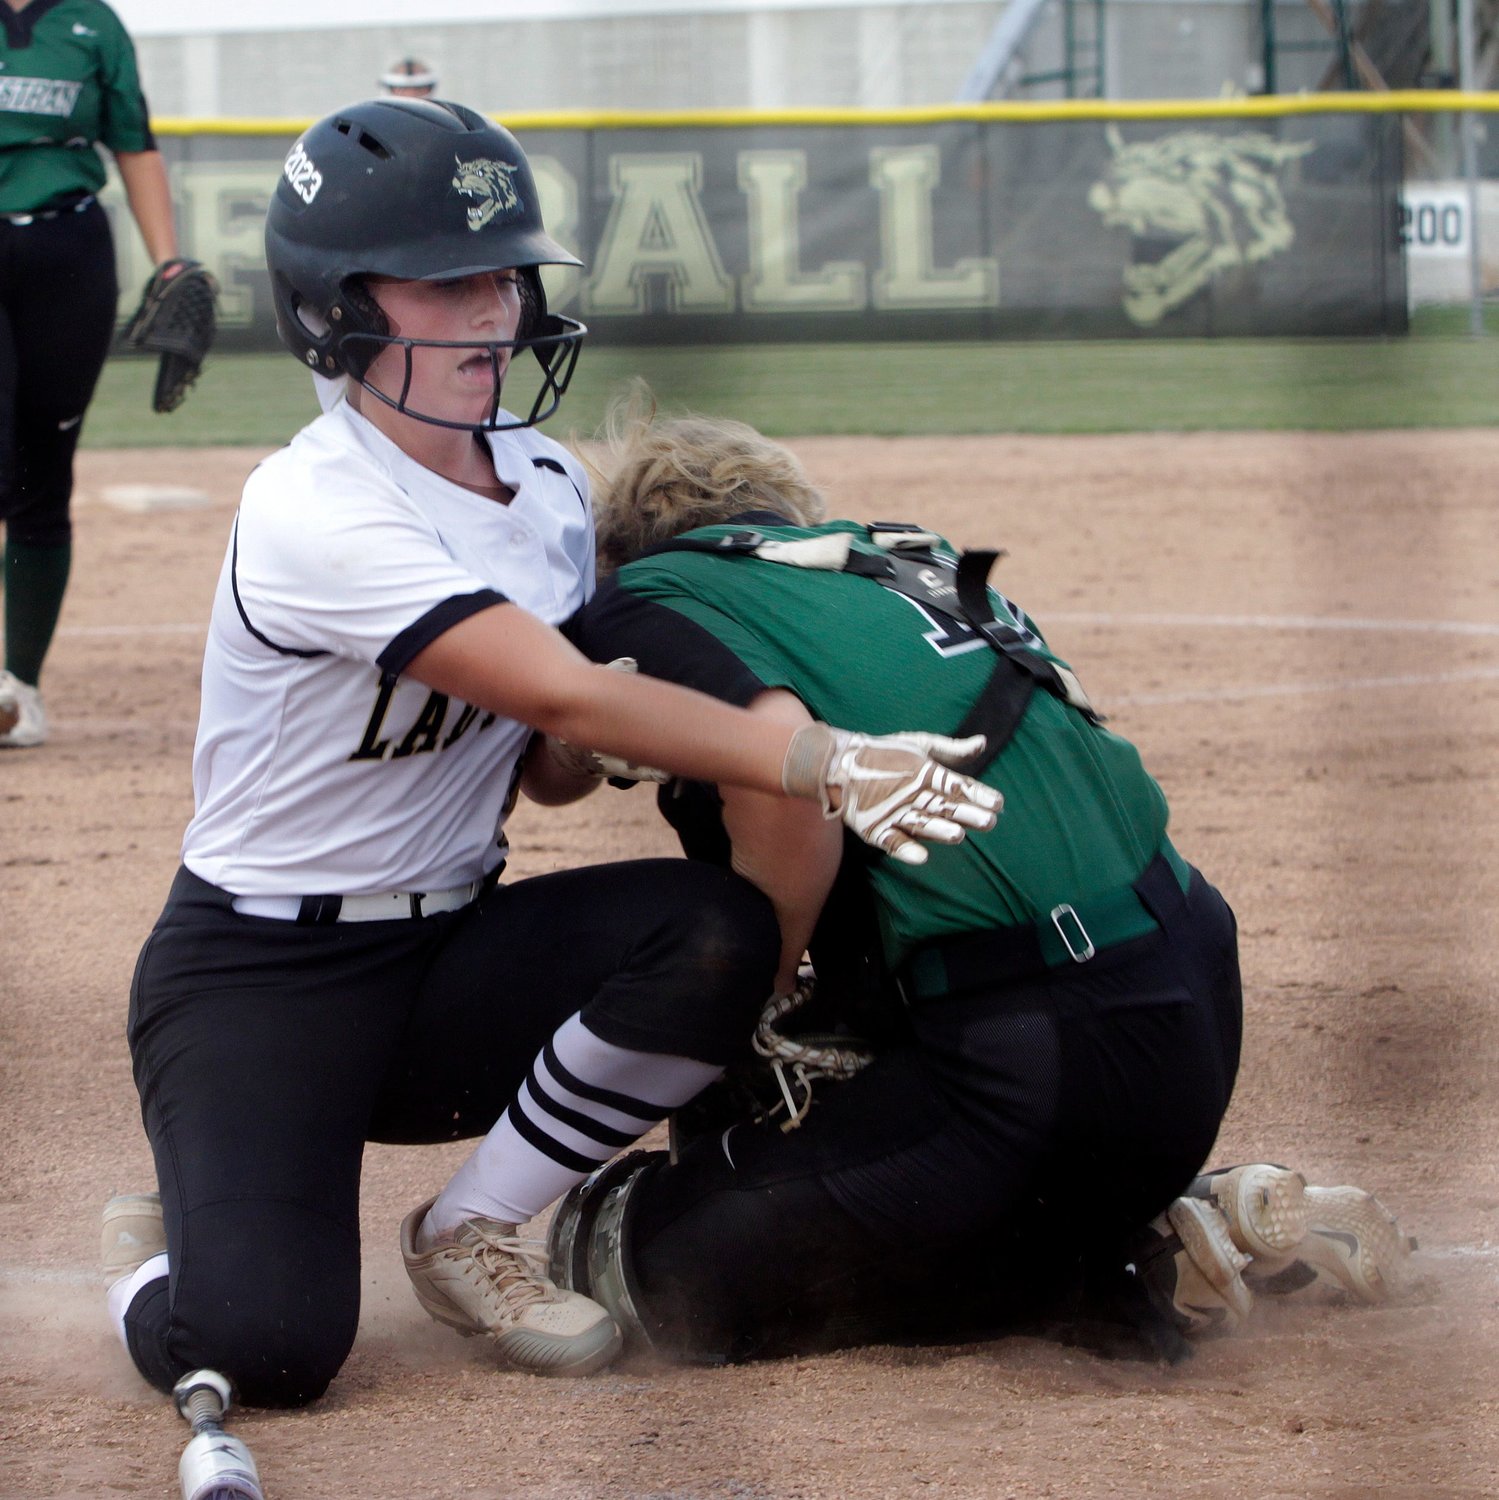 Westran High School senior catcher Bethany Dollich blocks home plate as she securely tags Cairo runner Gracie Brumley out in the bottom of the first inning Monday. Brumley tried to score from third base on an infield grounder, and the Lady Hornets from Huntsville topped Cairo winning 14-6.